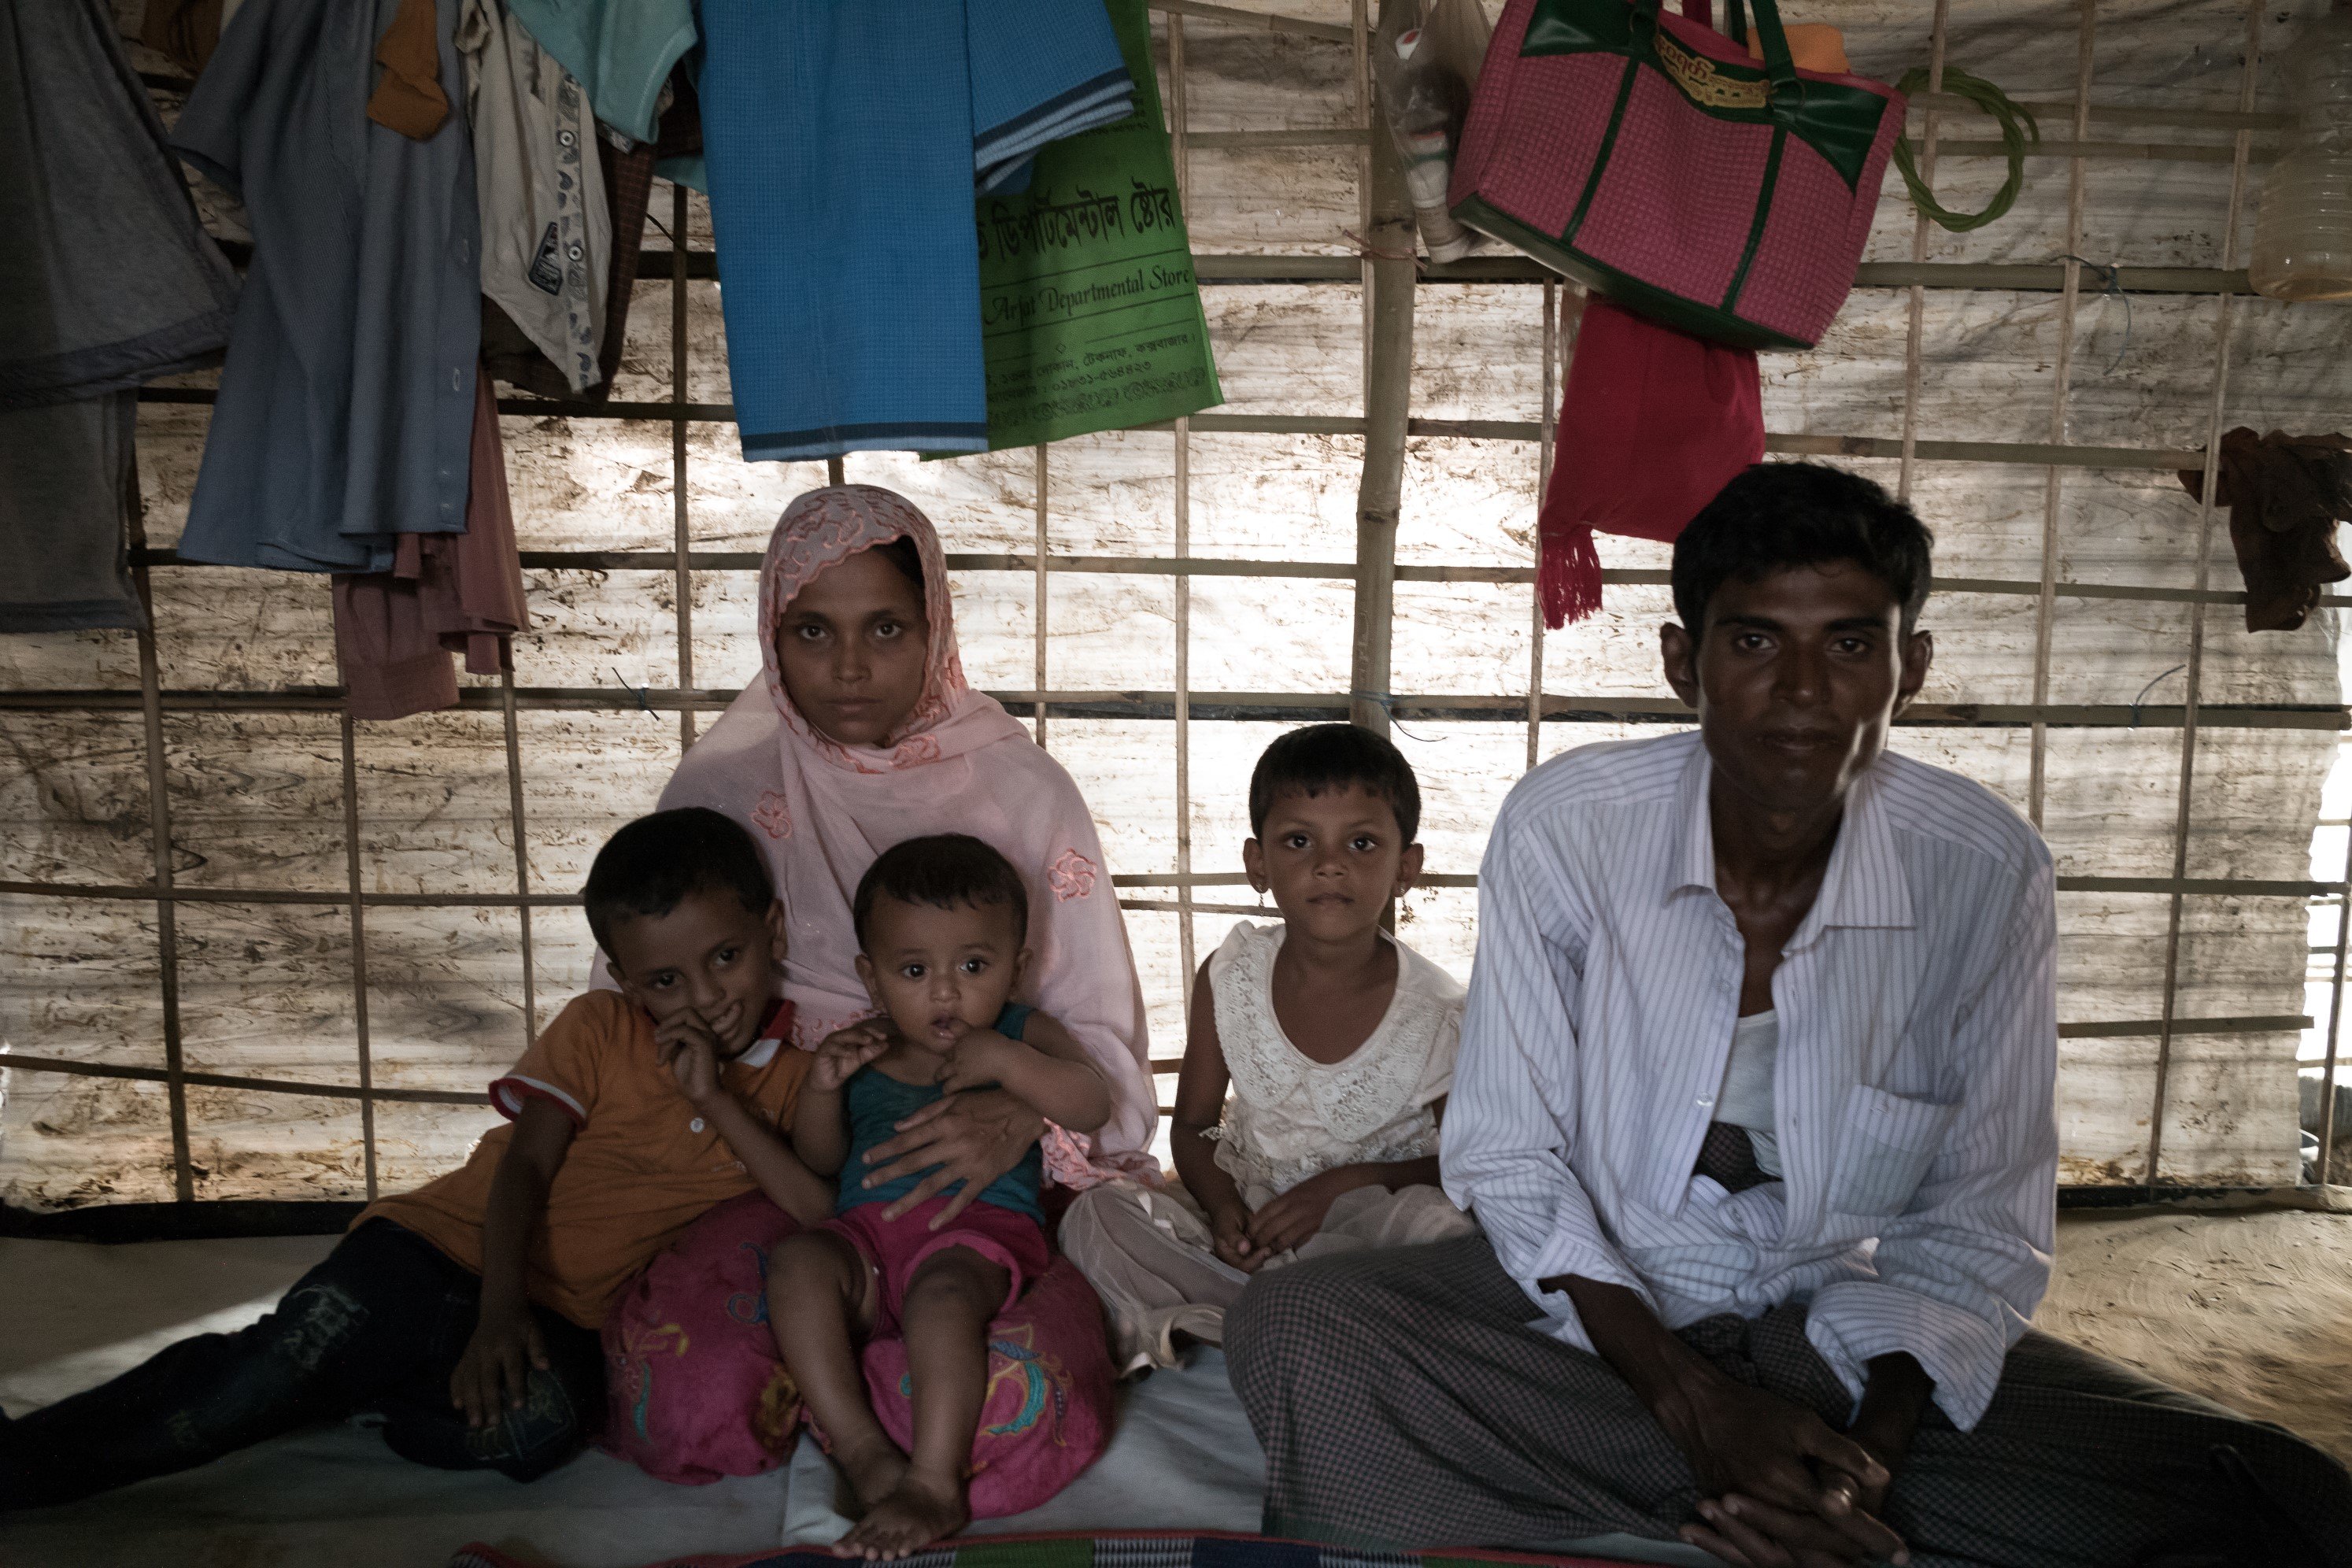 Khaleda, his wife and three children inside their tent.